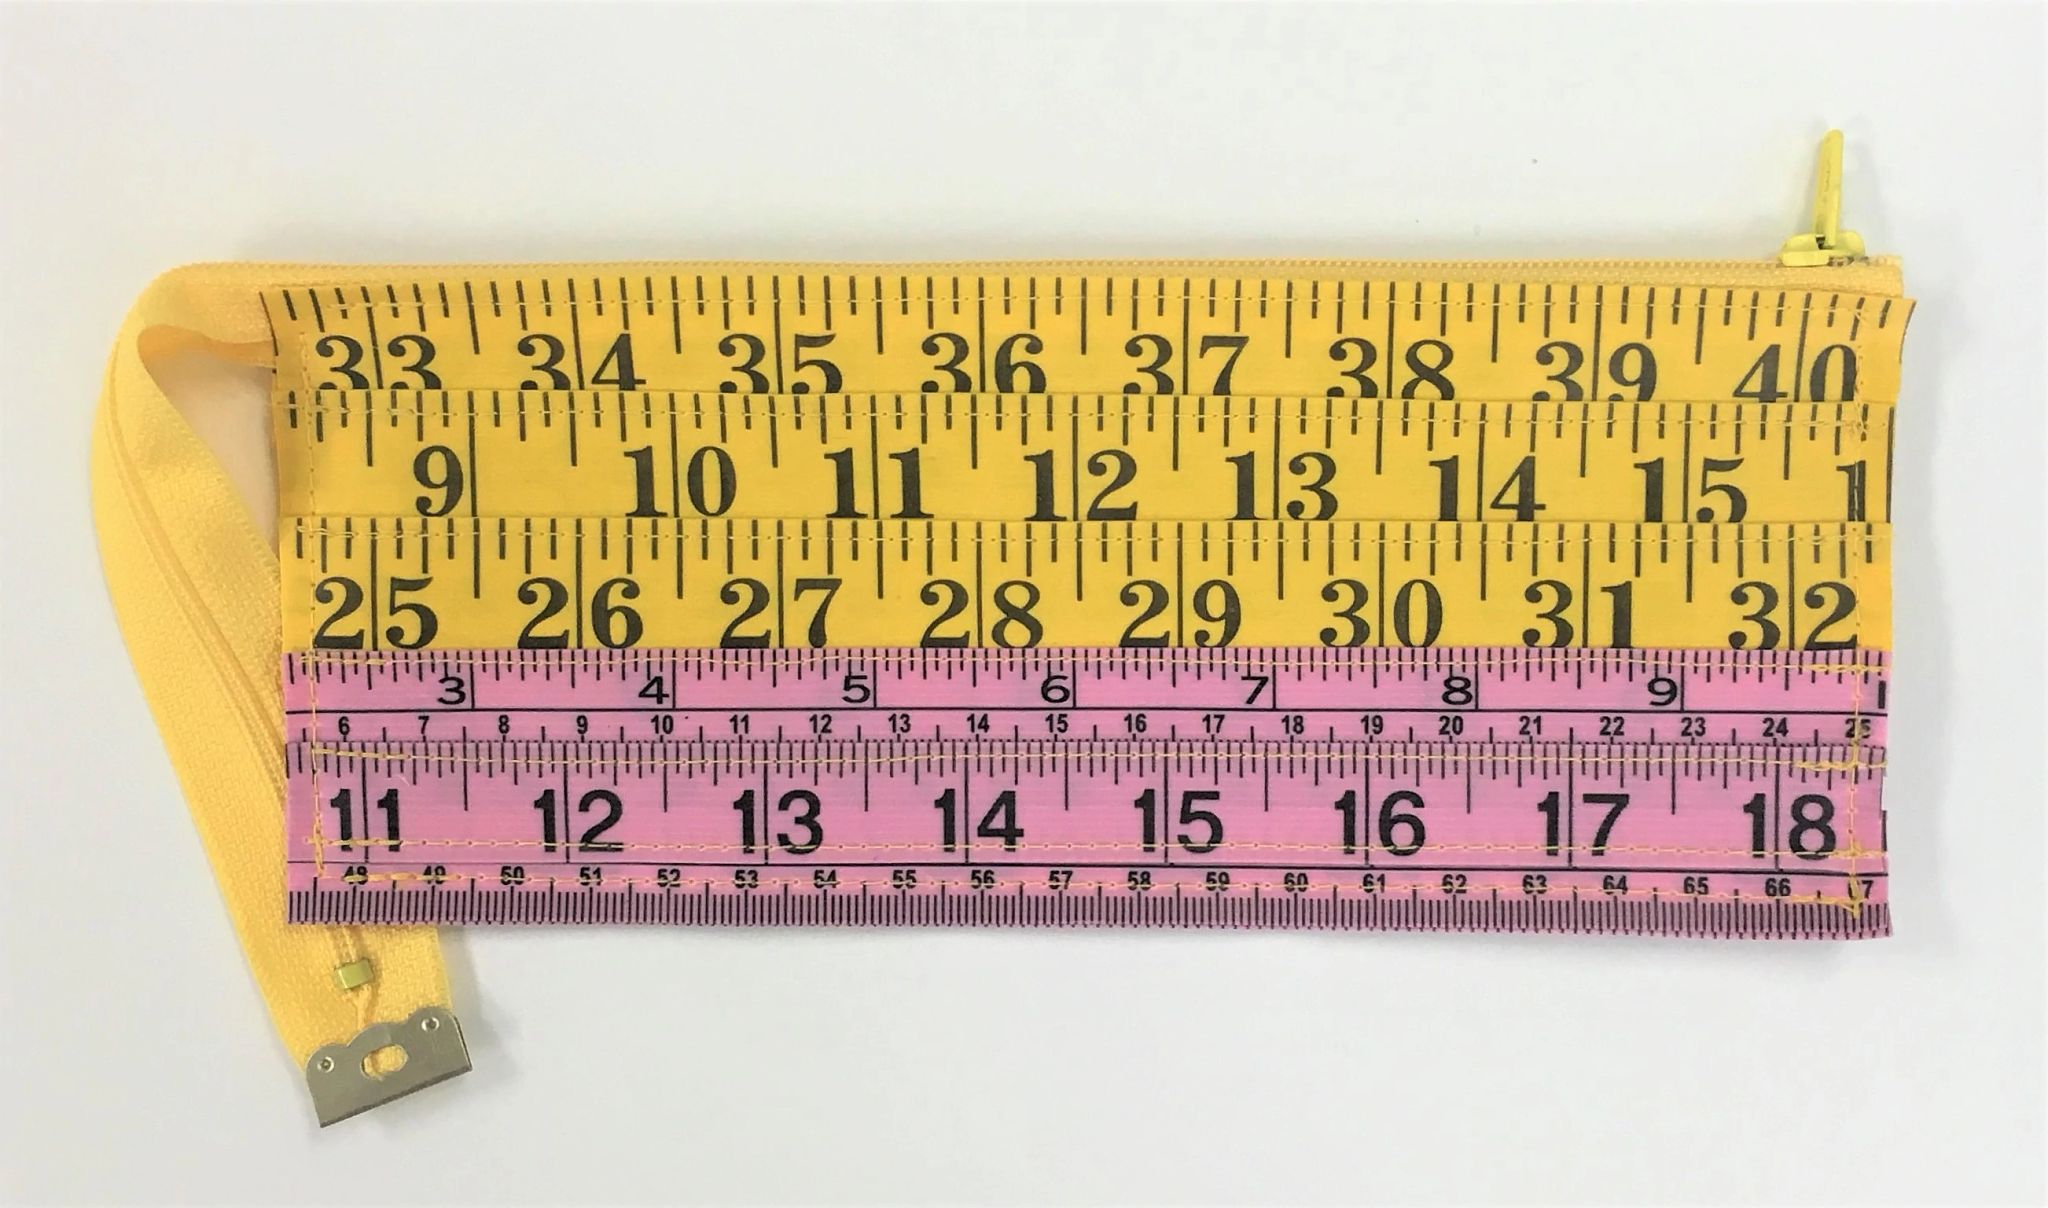 How to create a Pencil Case entierly from Measuring Tape